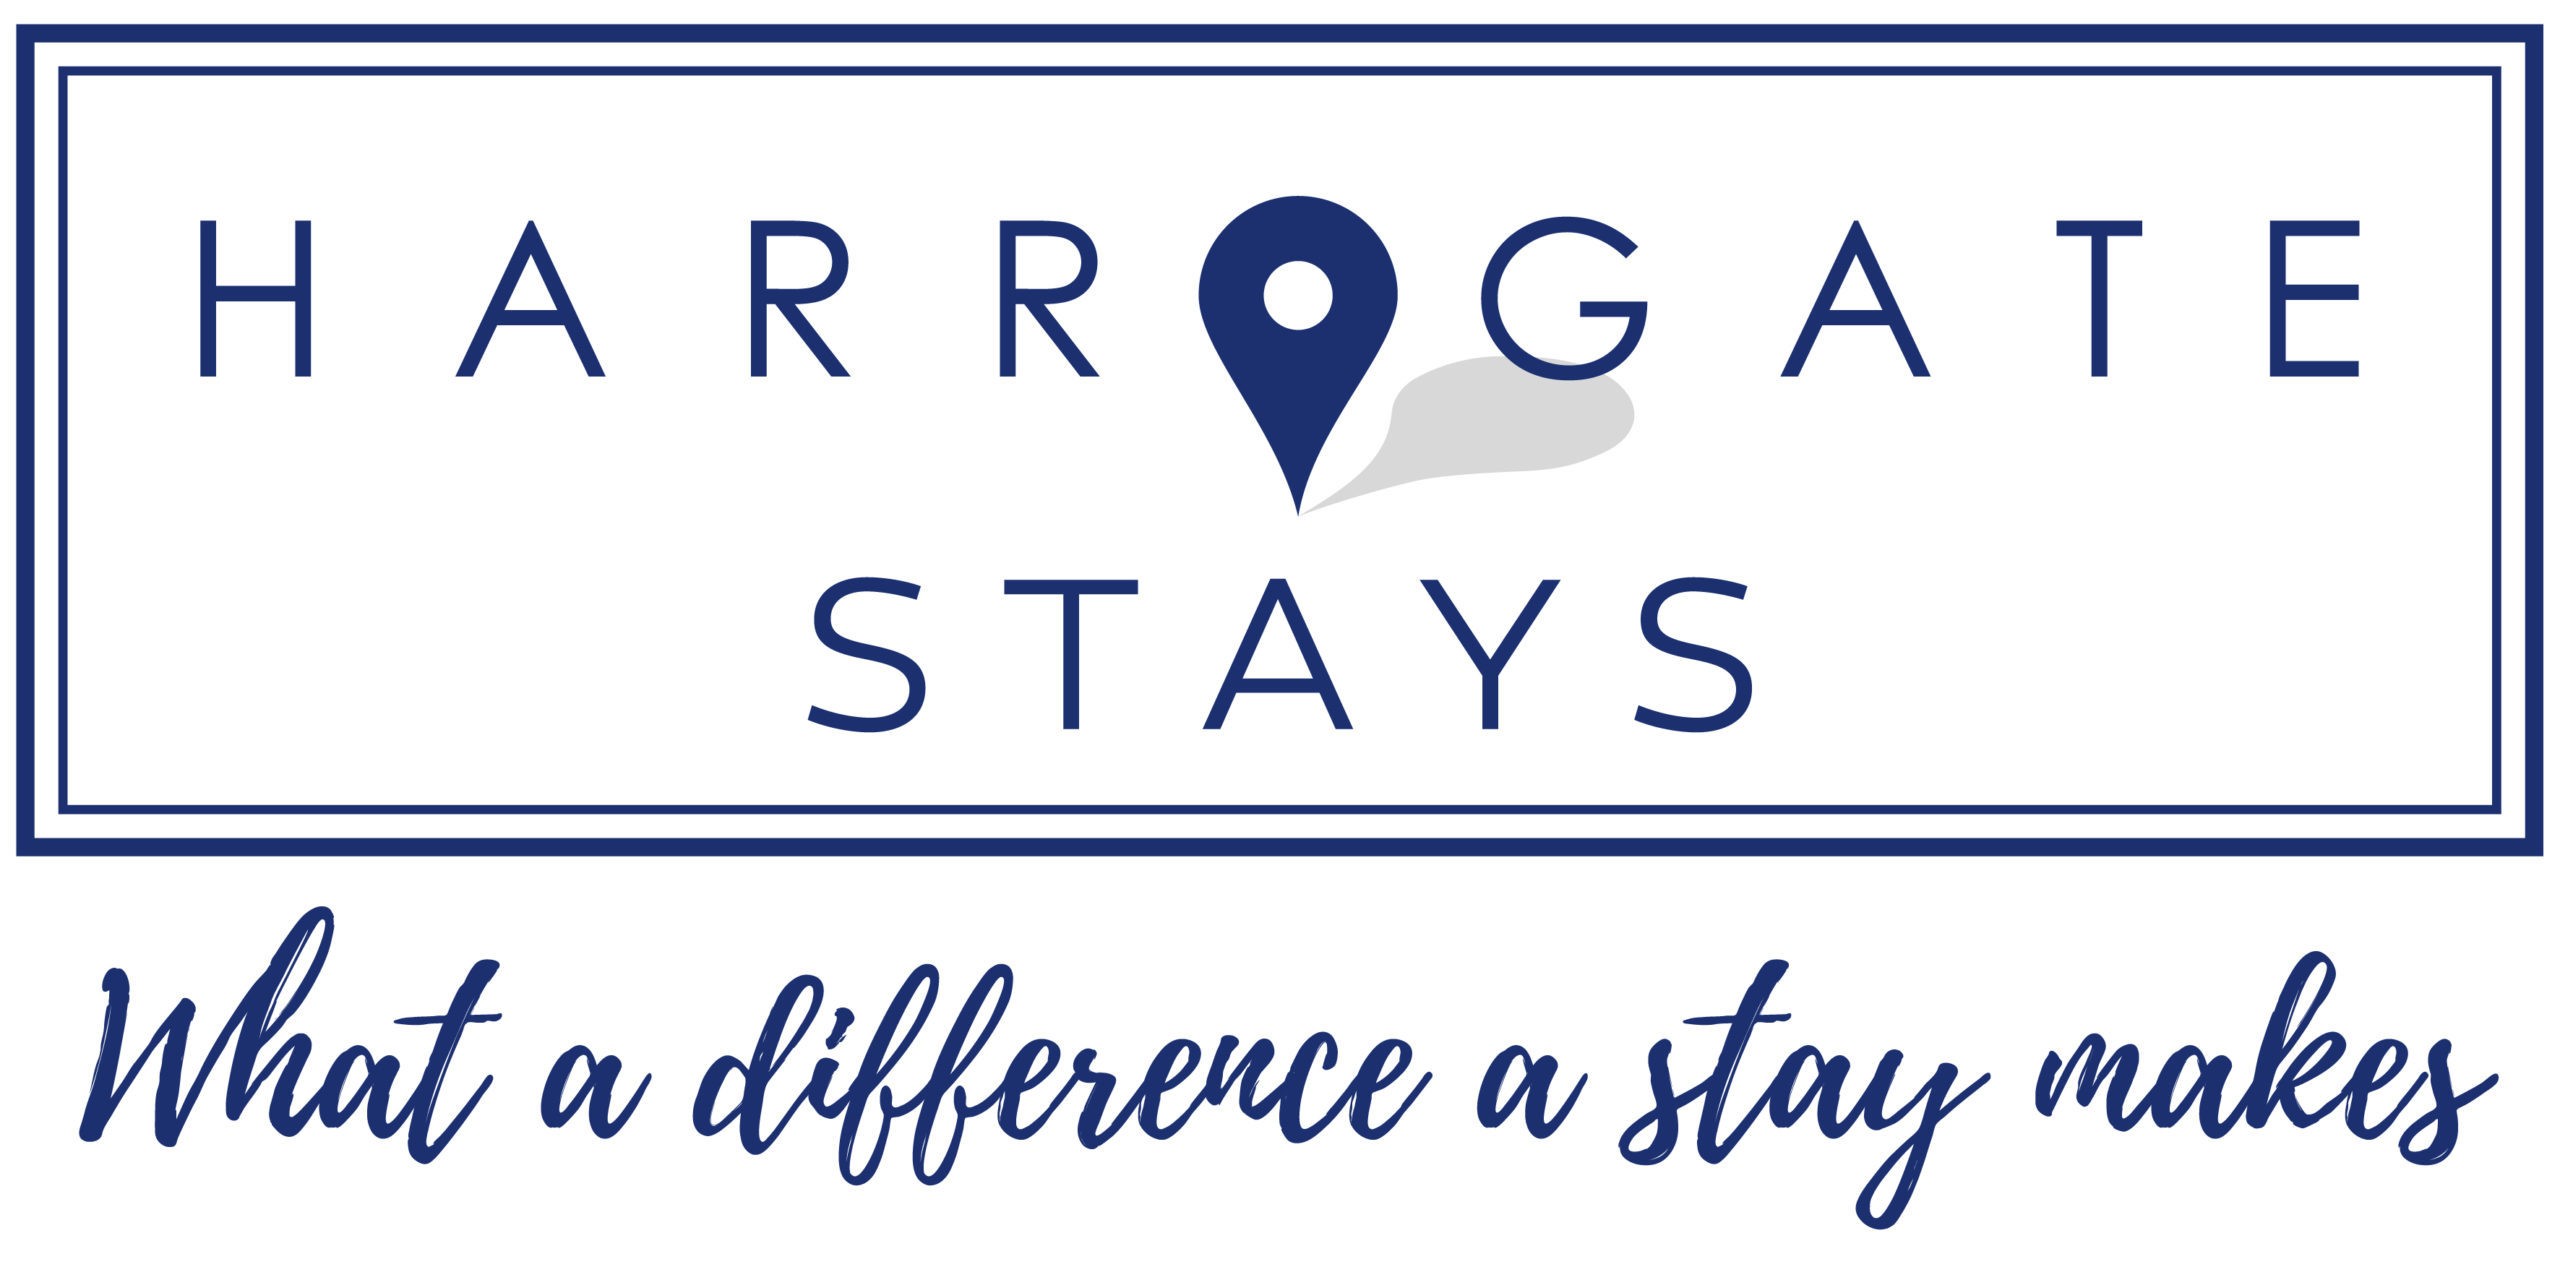 Places to stay in Harrogate. Top hotels in Harrogate. Best place to stay in Harrogate